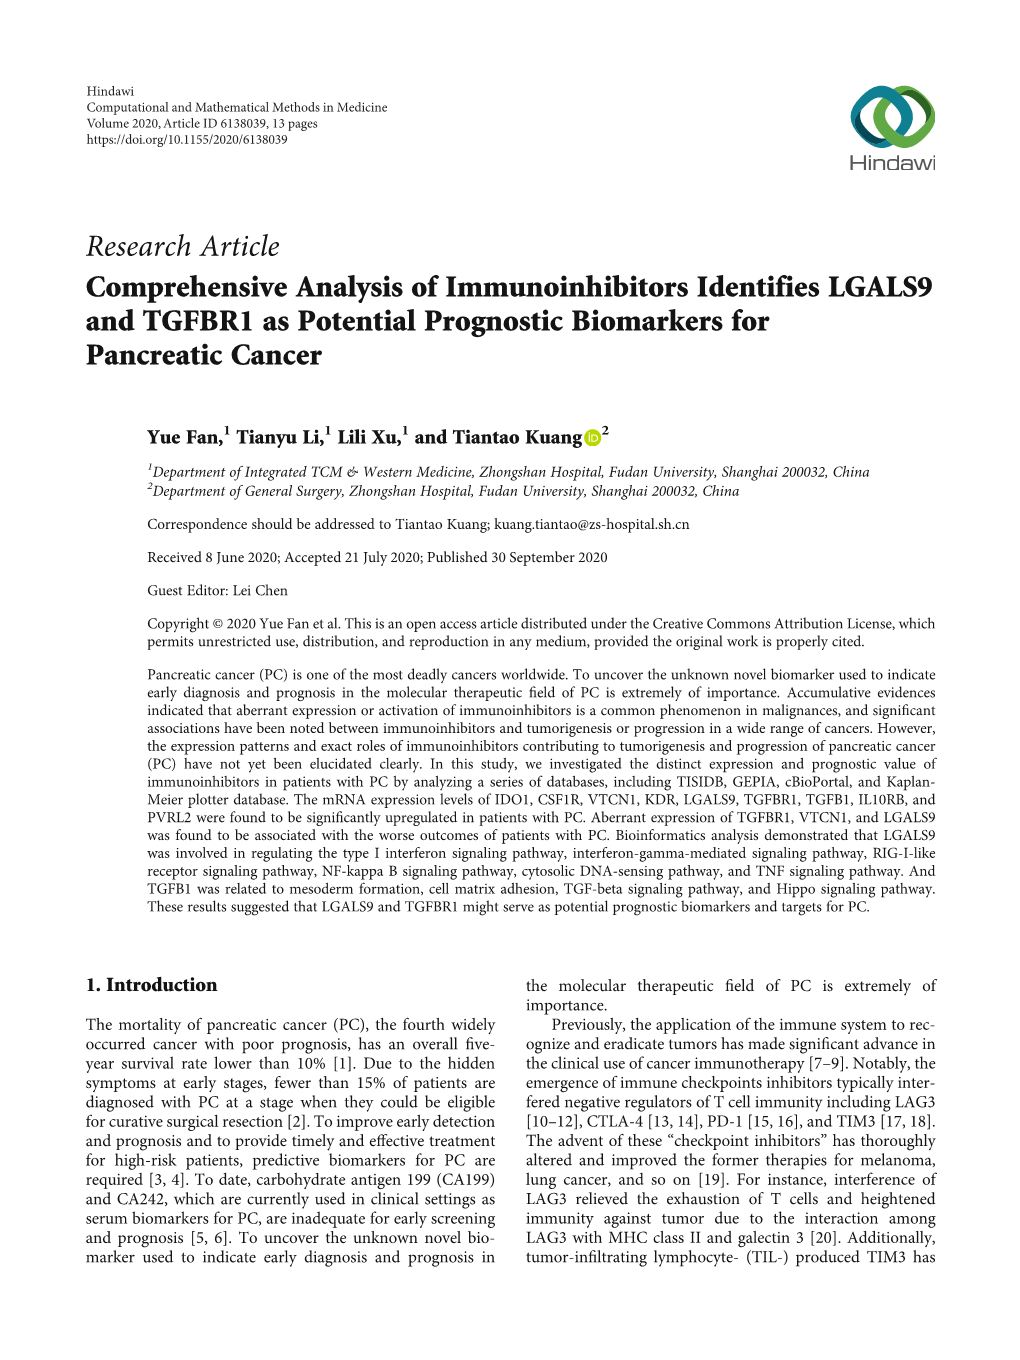 Research Article Comprehensive Analysis of Immunoinhibitors Identifies LGALS9 and TGFBR1 As Potential Prognostic Biomarkers for Pancreatic Cancer